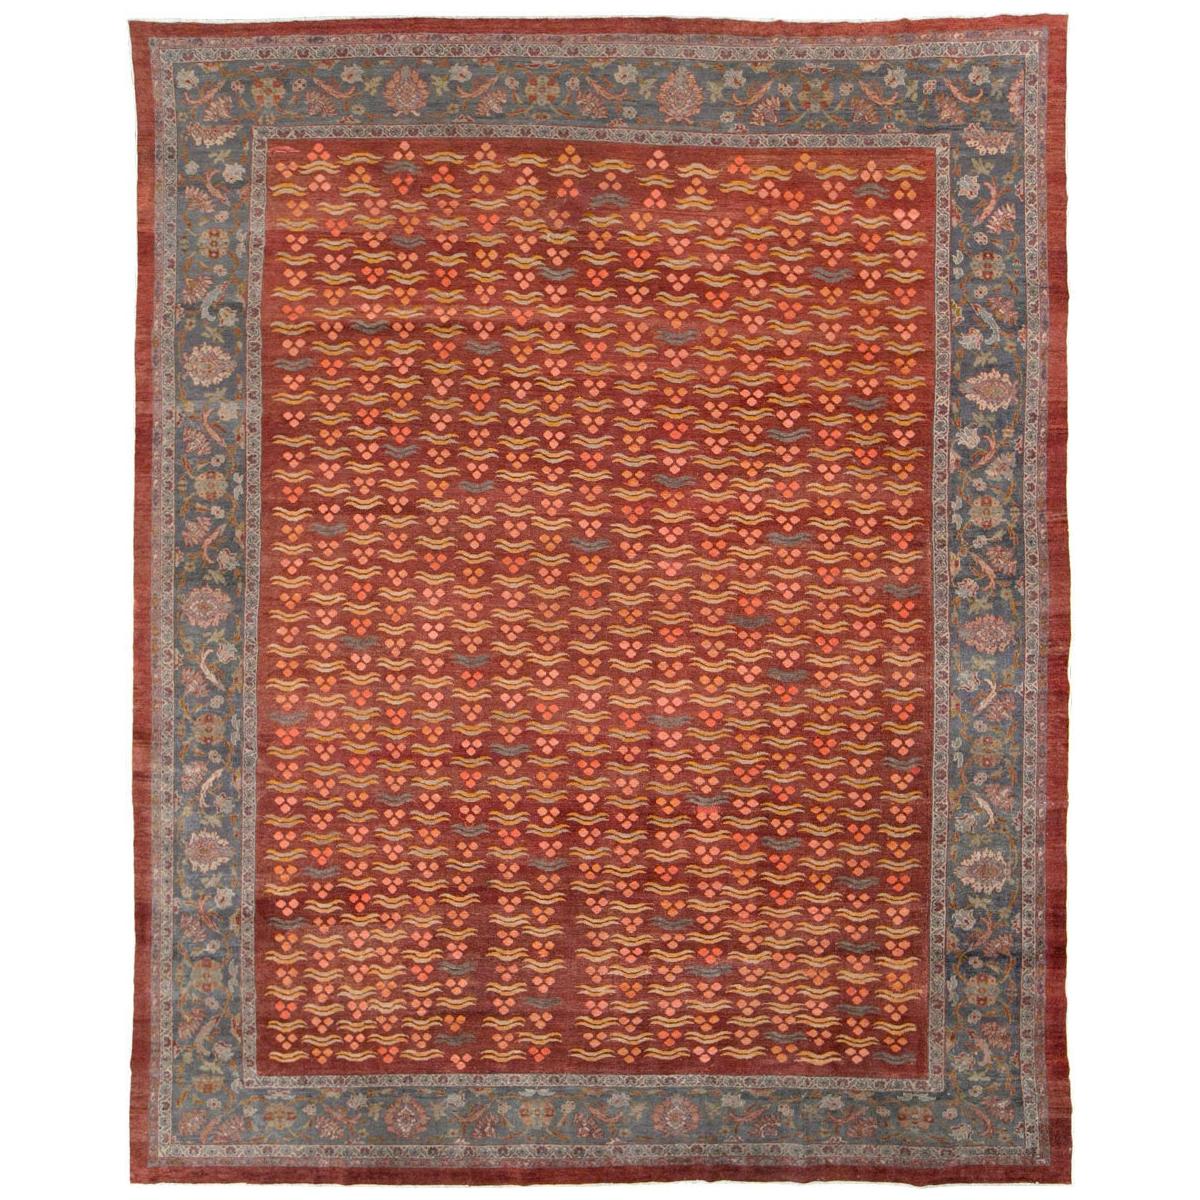 Early 20th Century Handmade Persian Chintamani Mahal Large Room Size Carpet For Sale